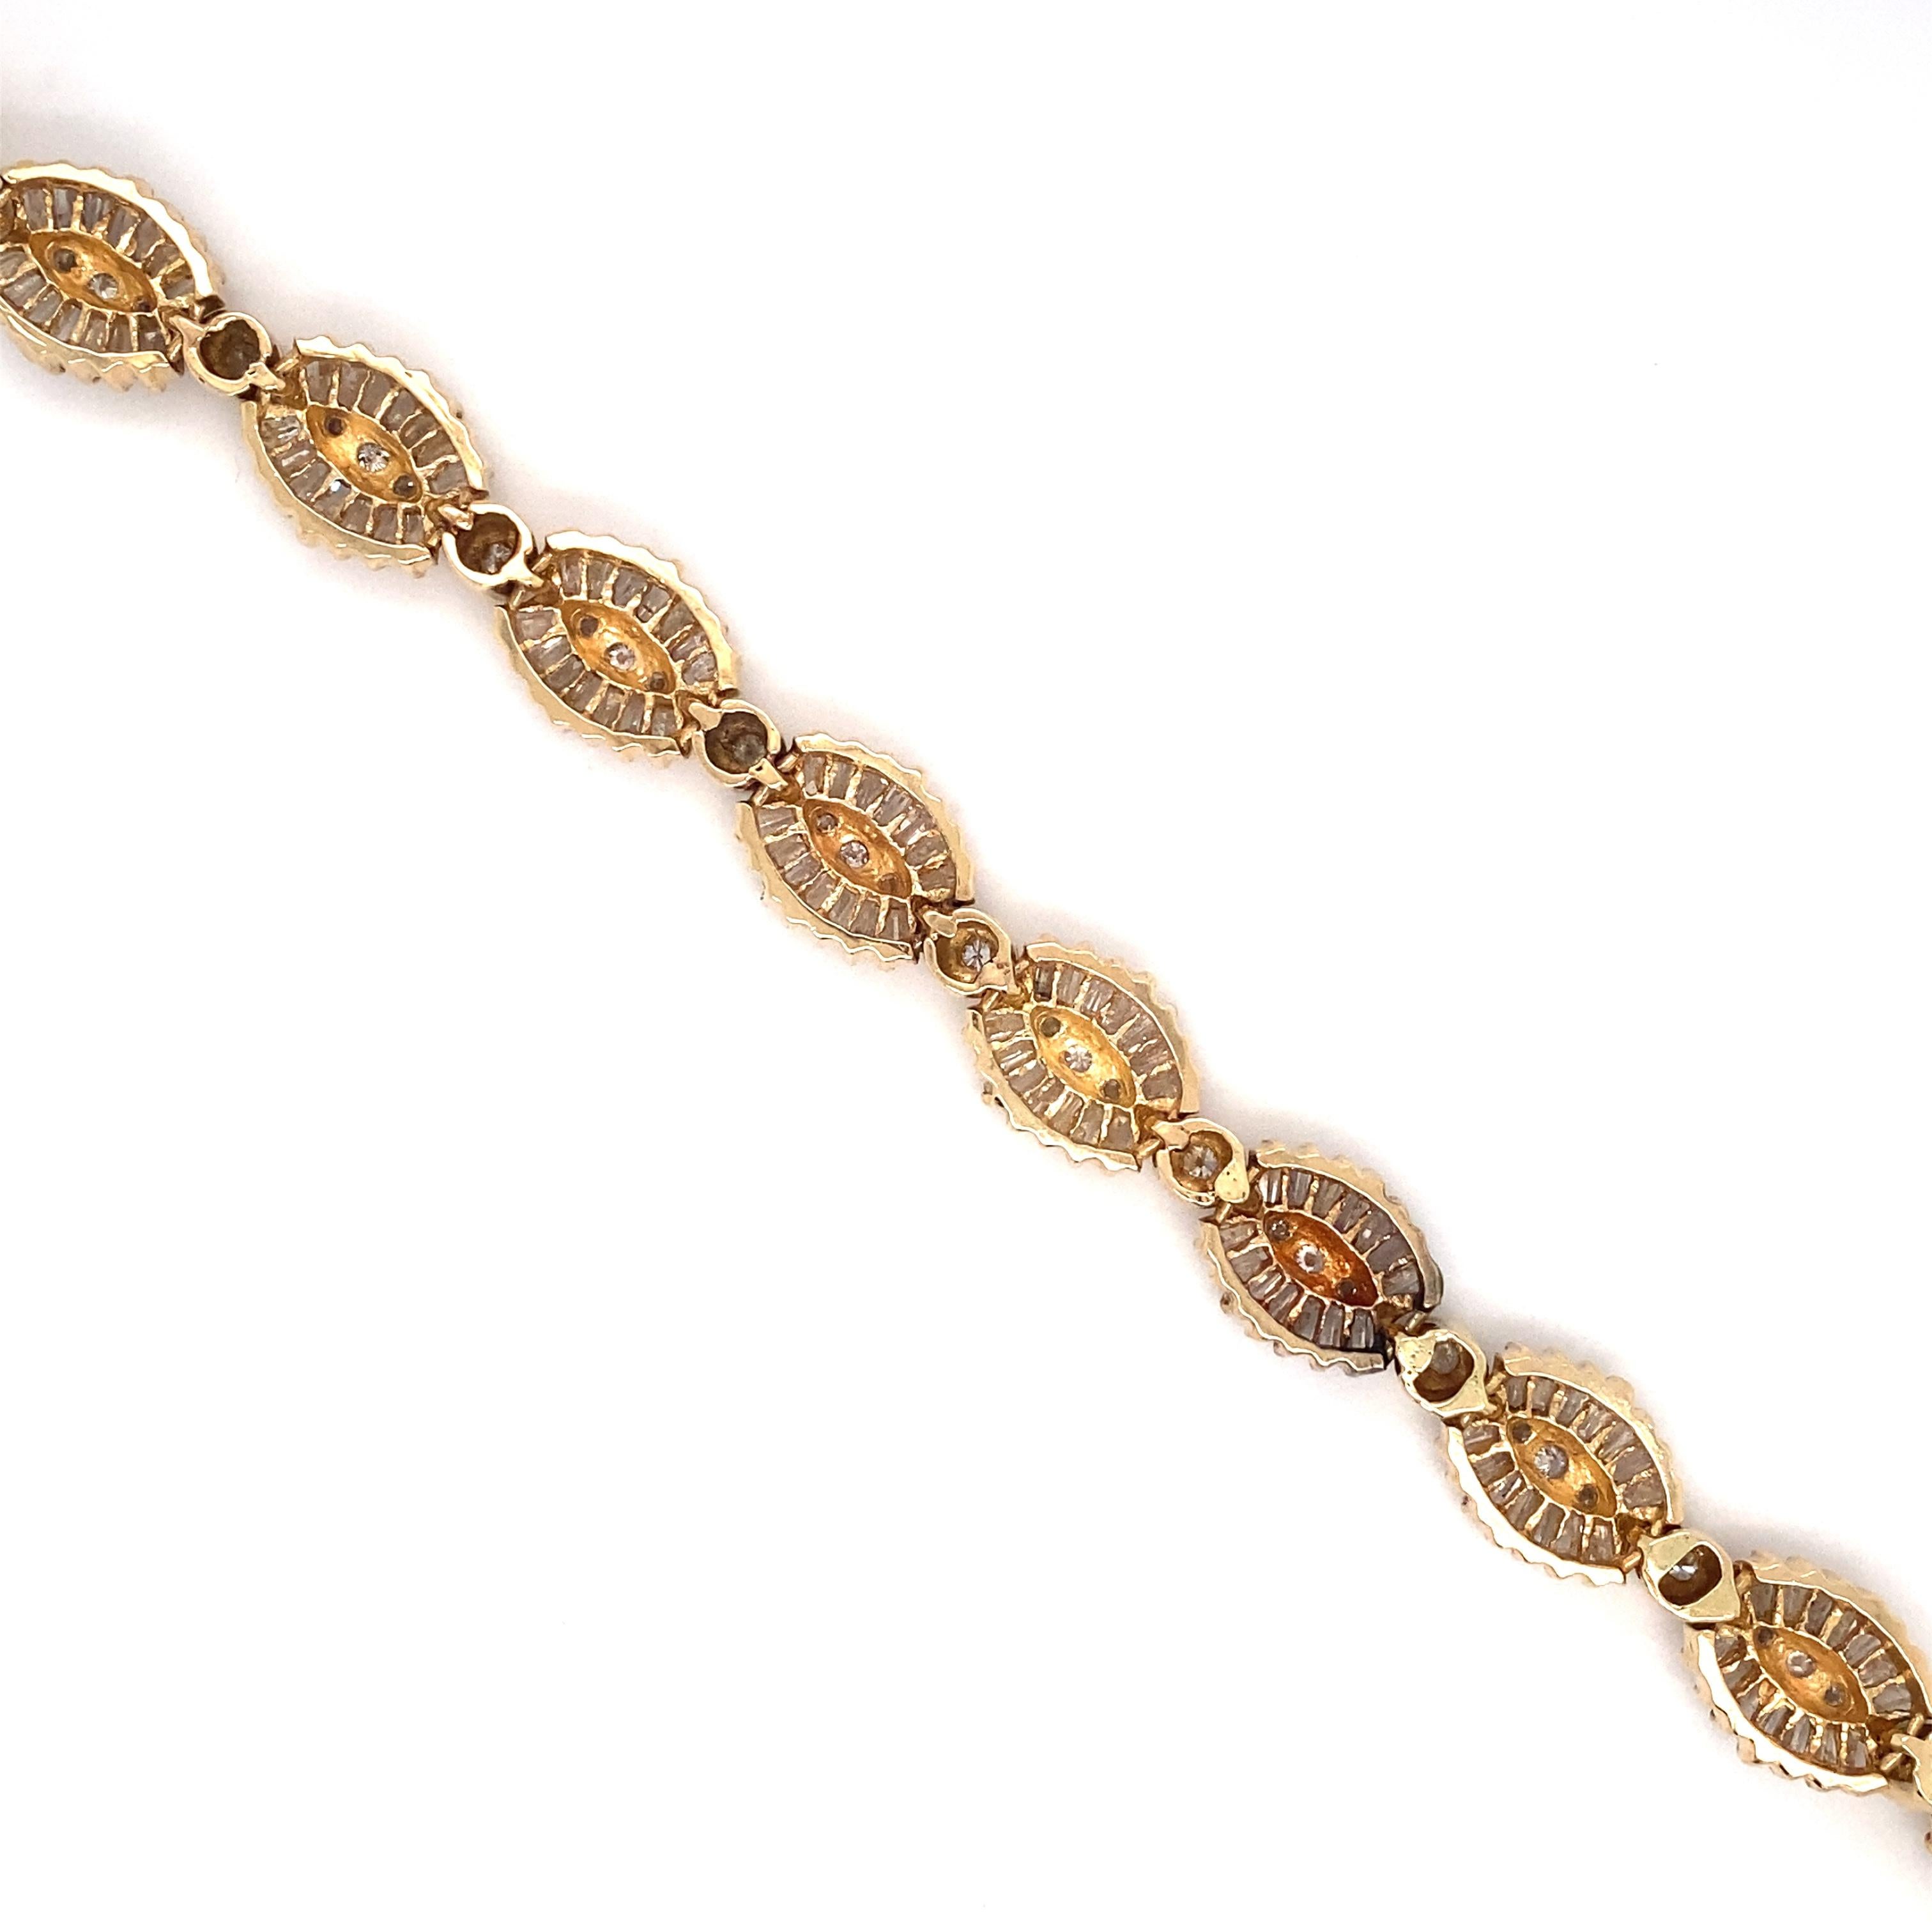 Circa: 1980s
Metal Type: 14 Karat Yellow Gold
Weight: 25.5 grams
Dimensions: 6.75 inch Length

Diamond Details:
Carat: 3.50 Carat Total Weight
Cut: Round and tapered baguette
Color: G-I
Clarity: VS-I1